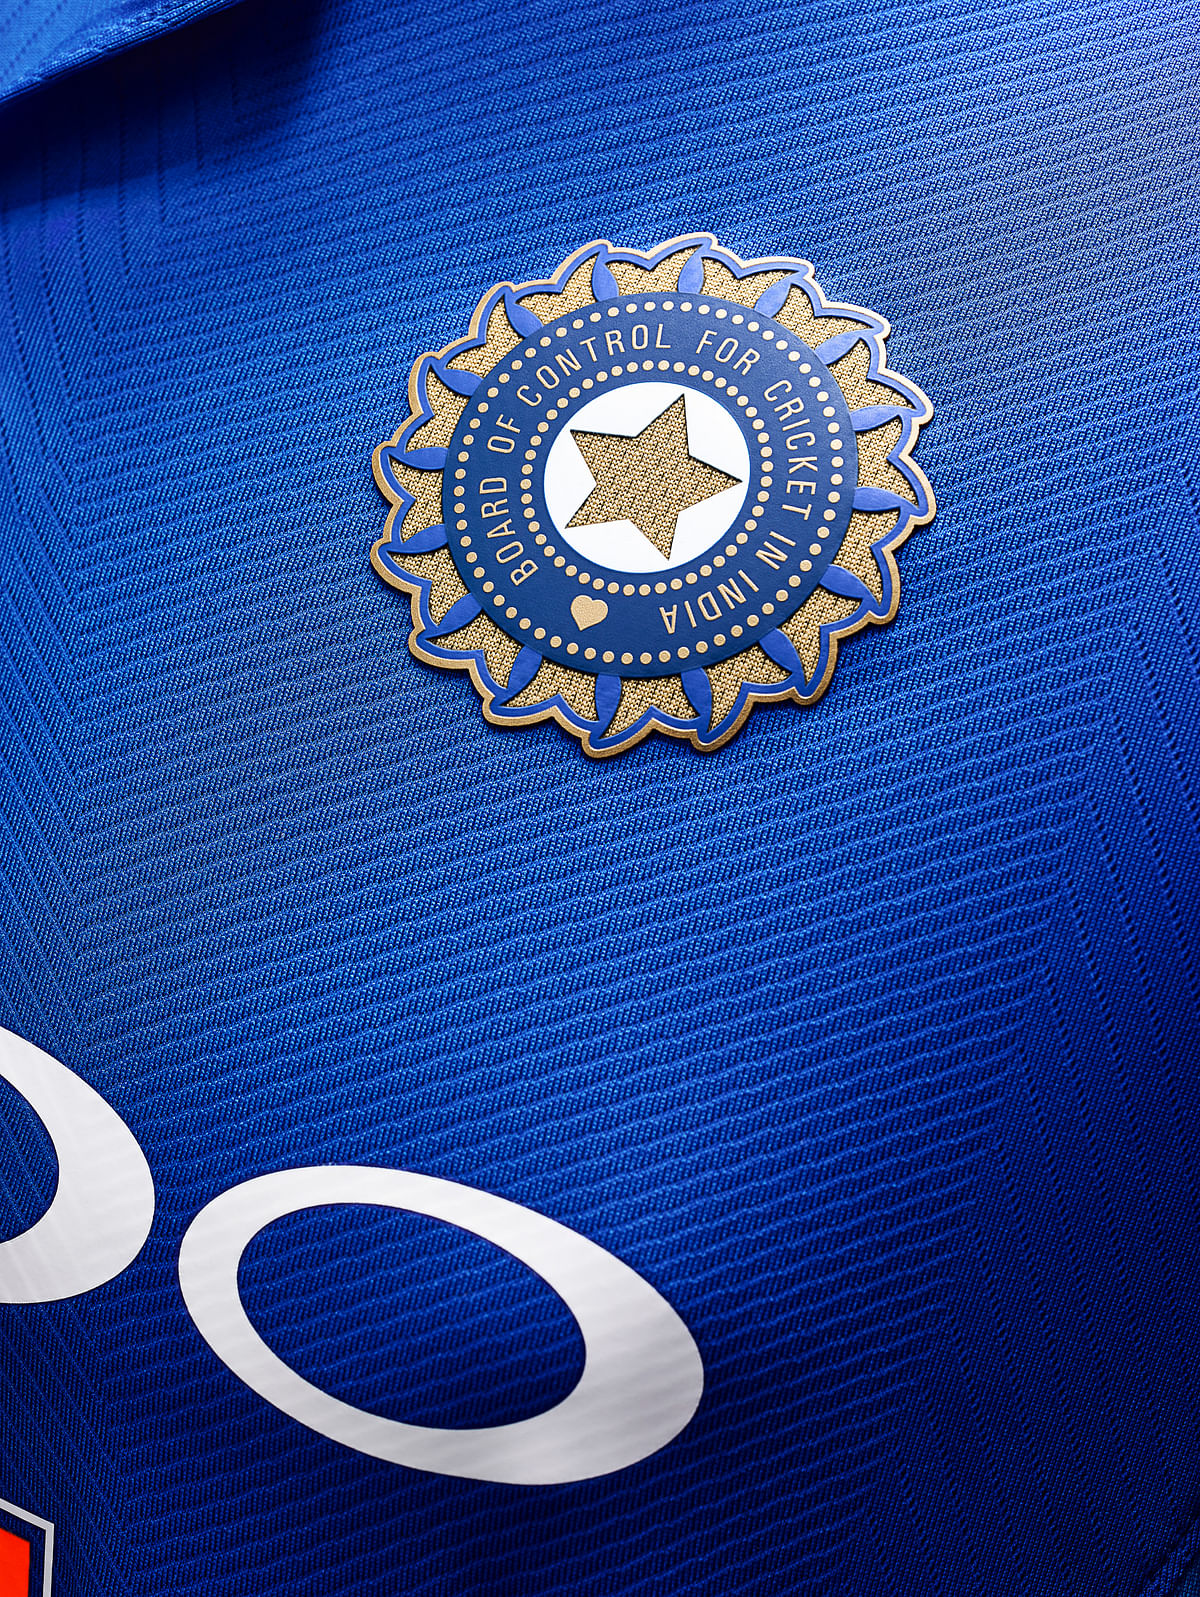 Here’s a look at the features of the new Team India jersey.